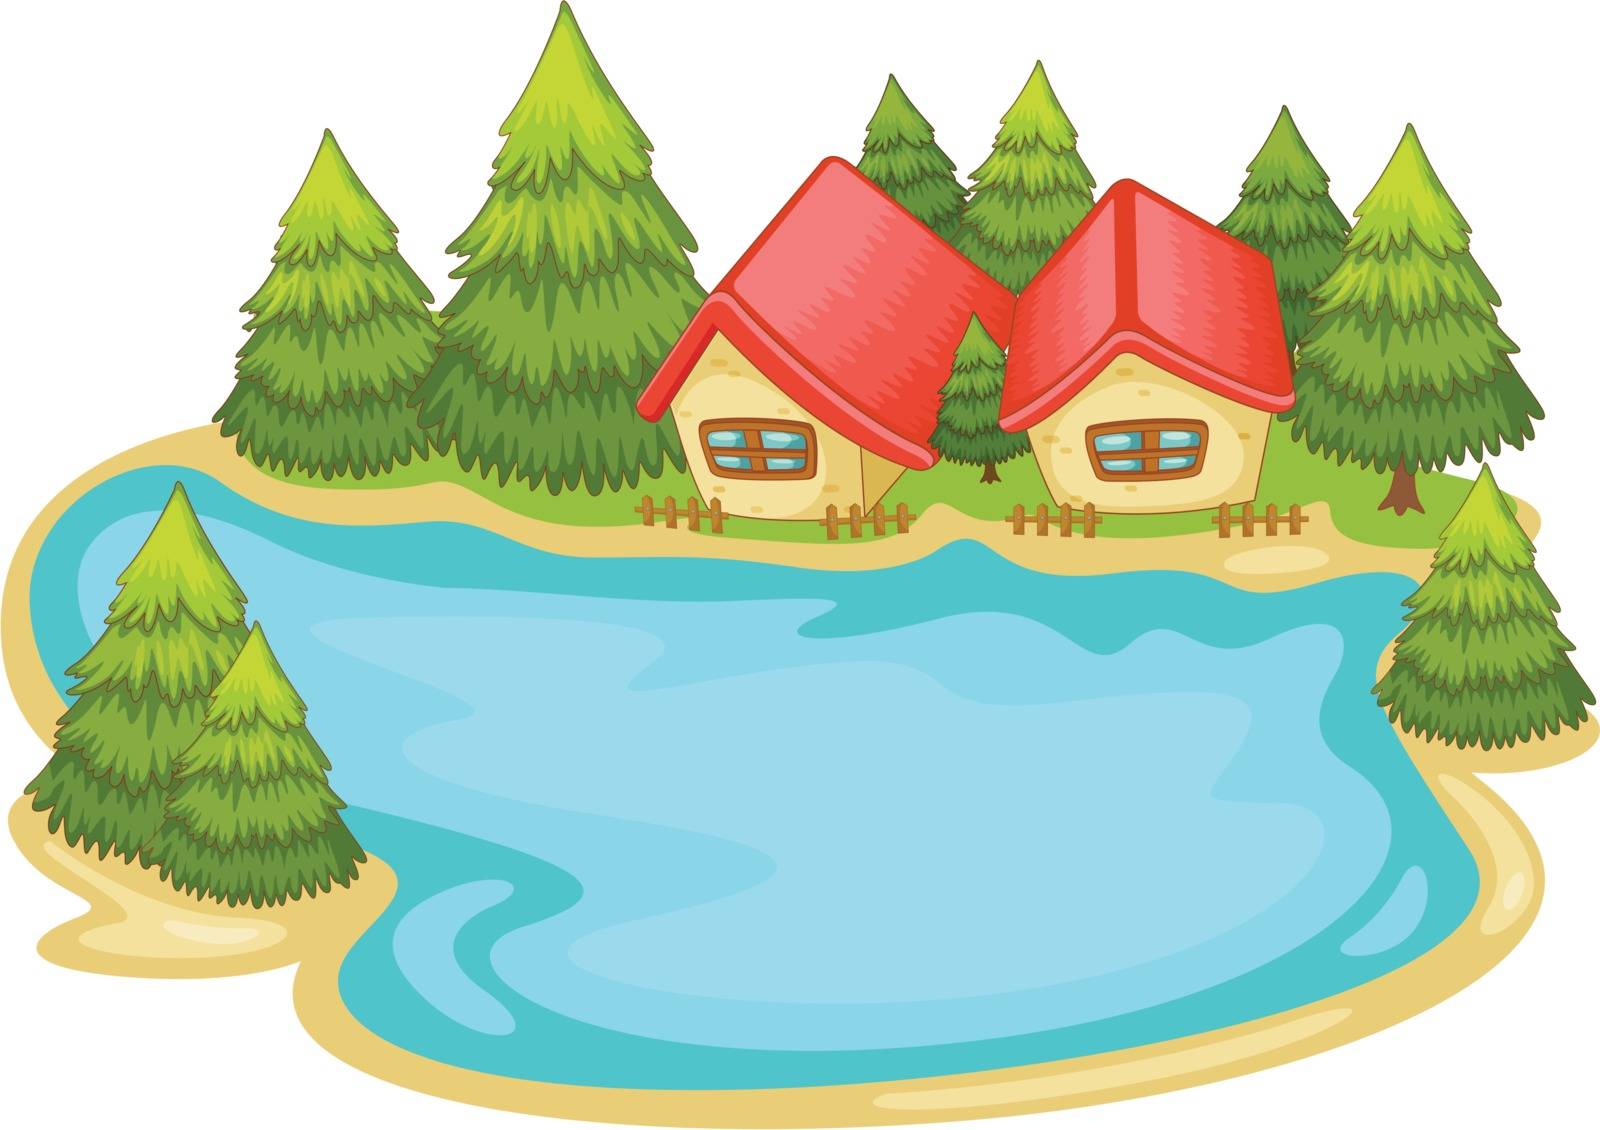 Illustration of nature cabins on white